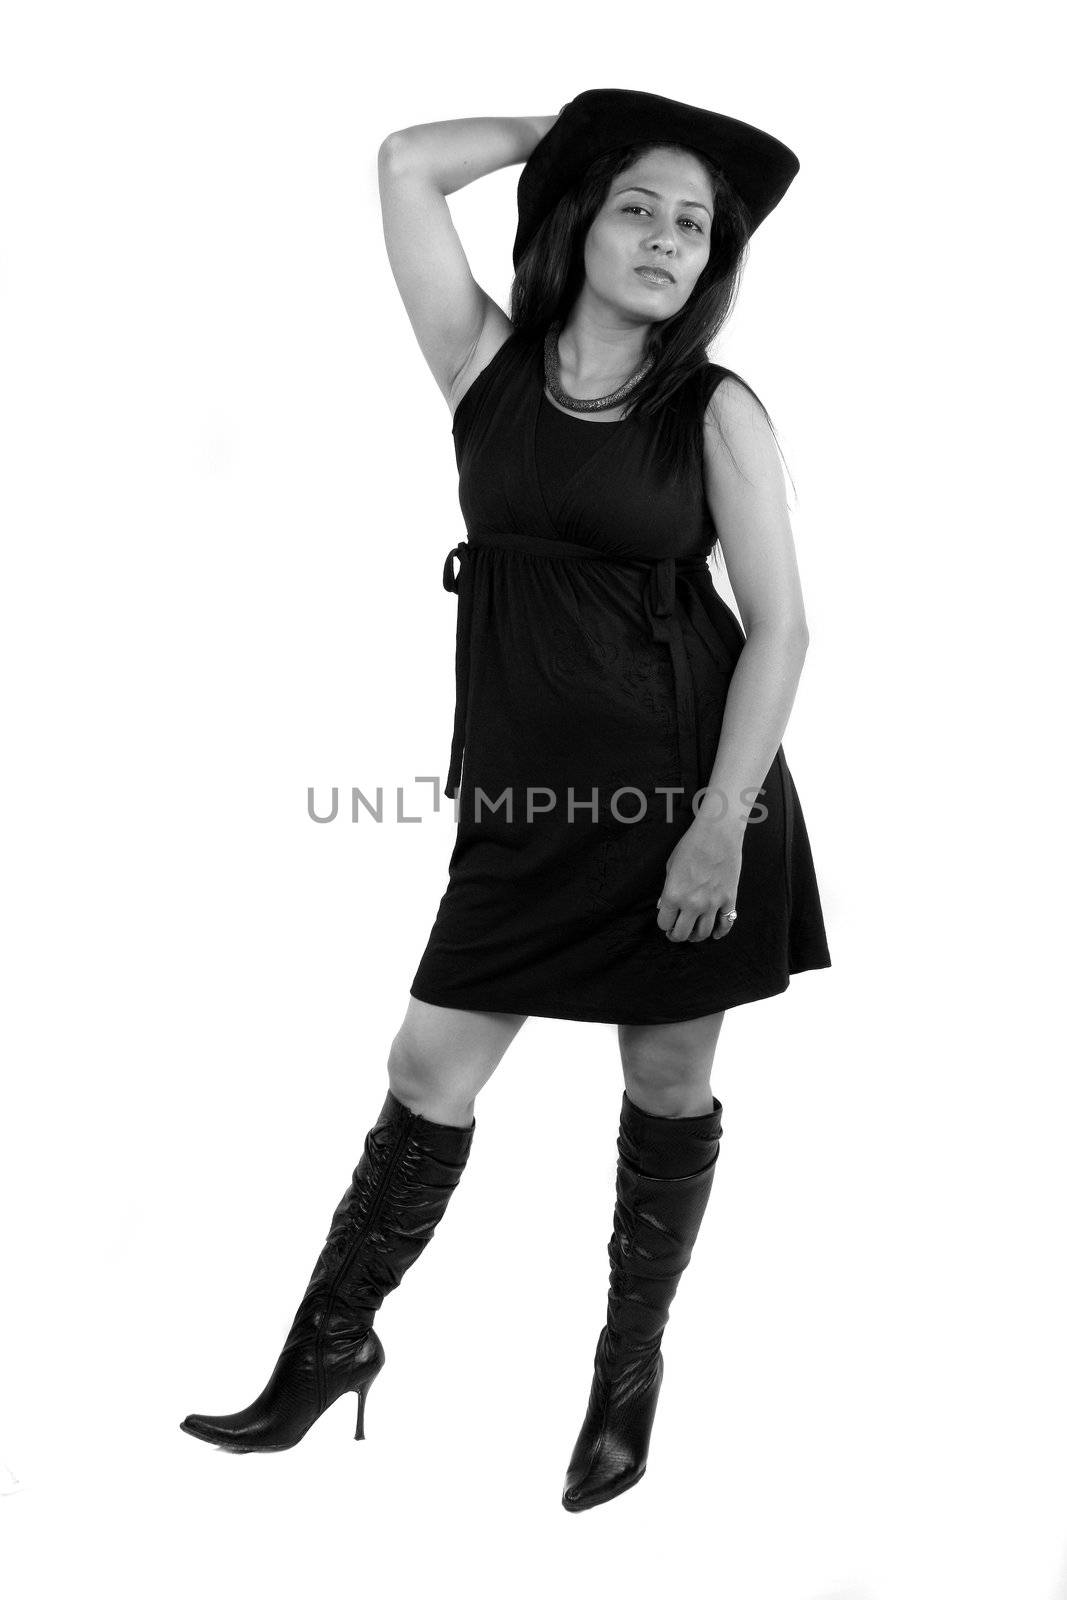 A glamorous Indian model wearing a hat, isolated on white studio background.